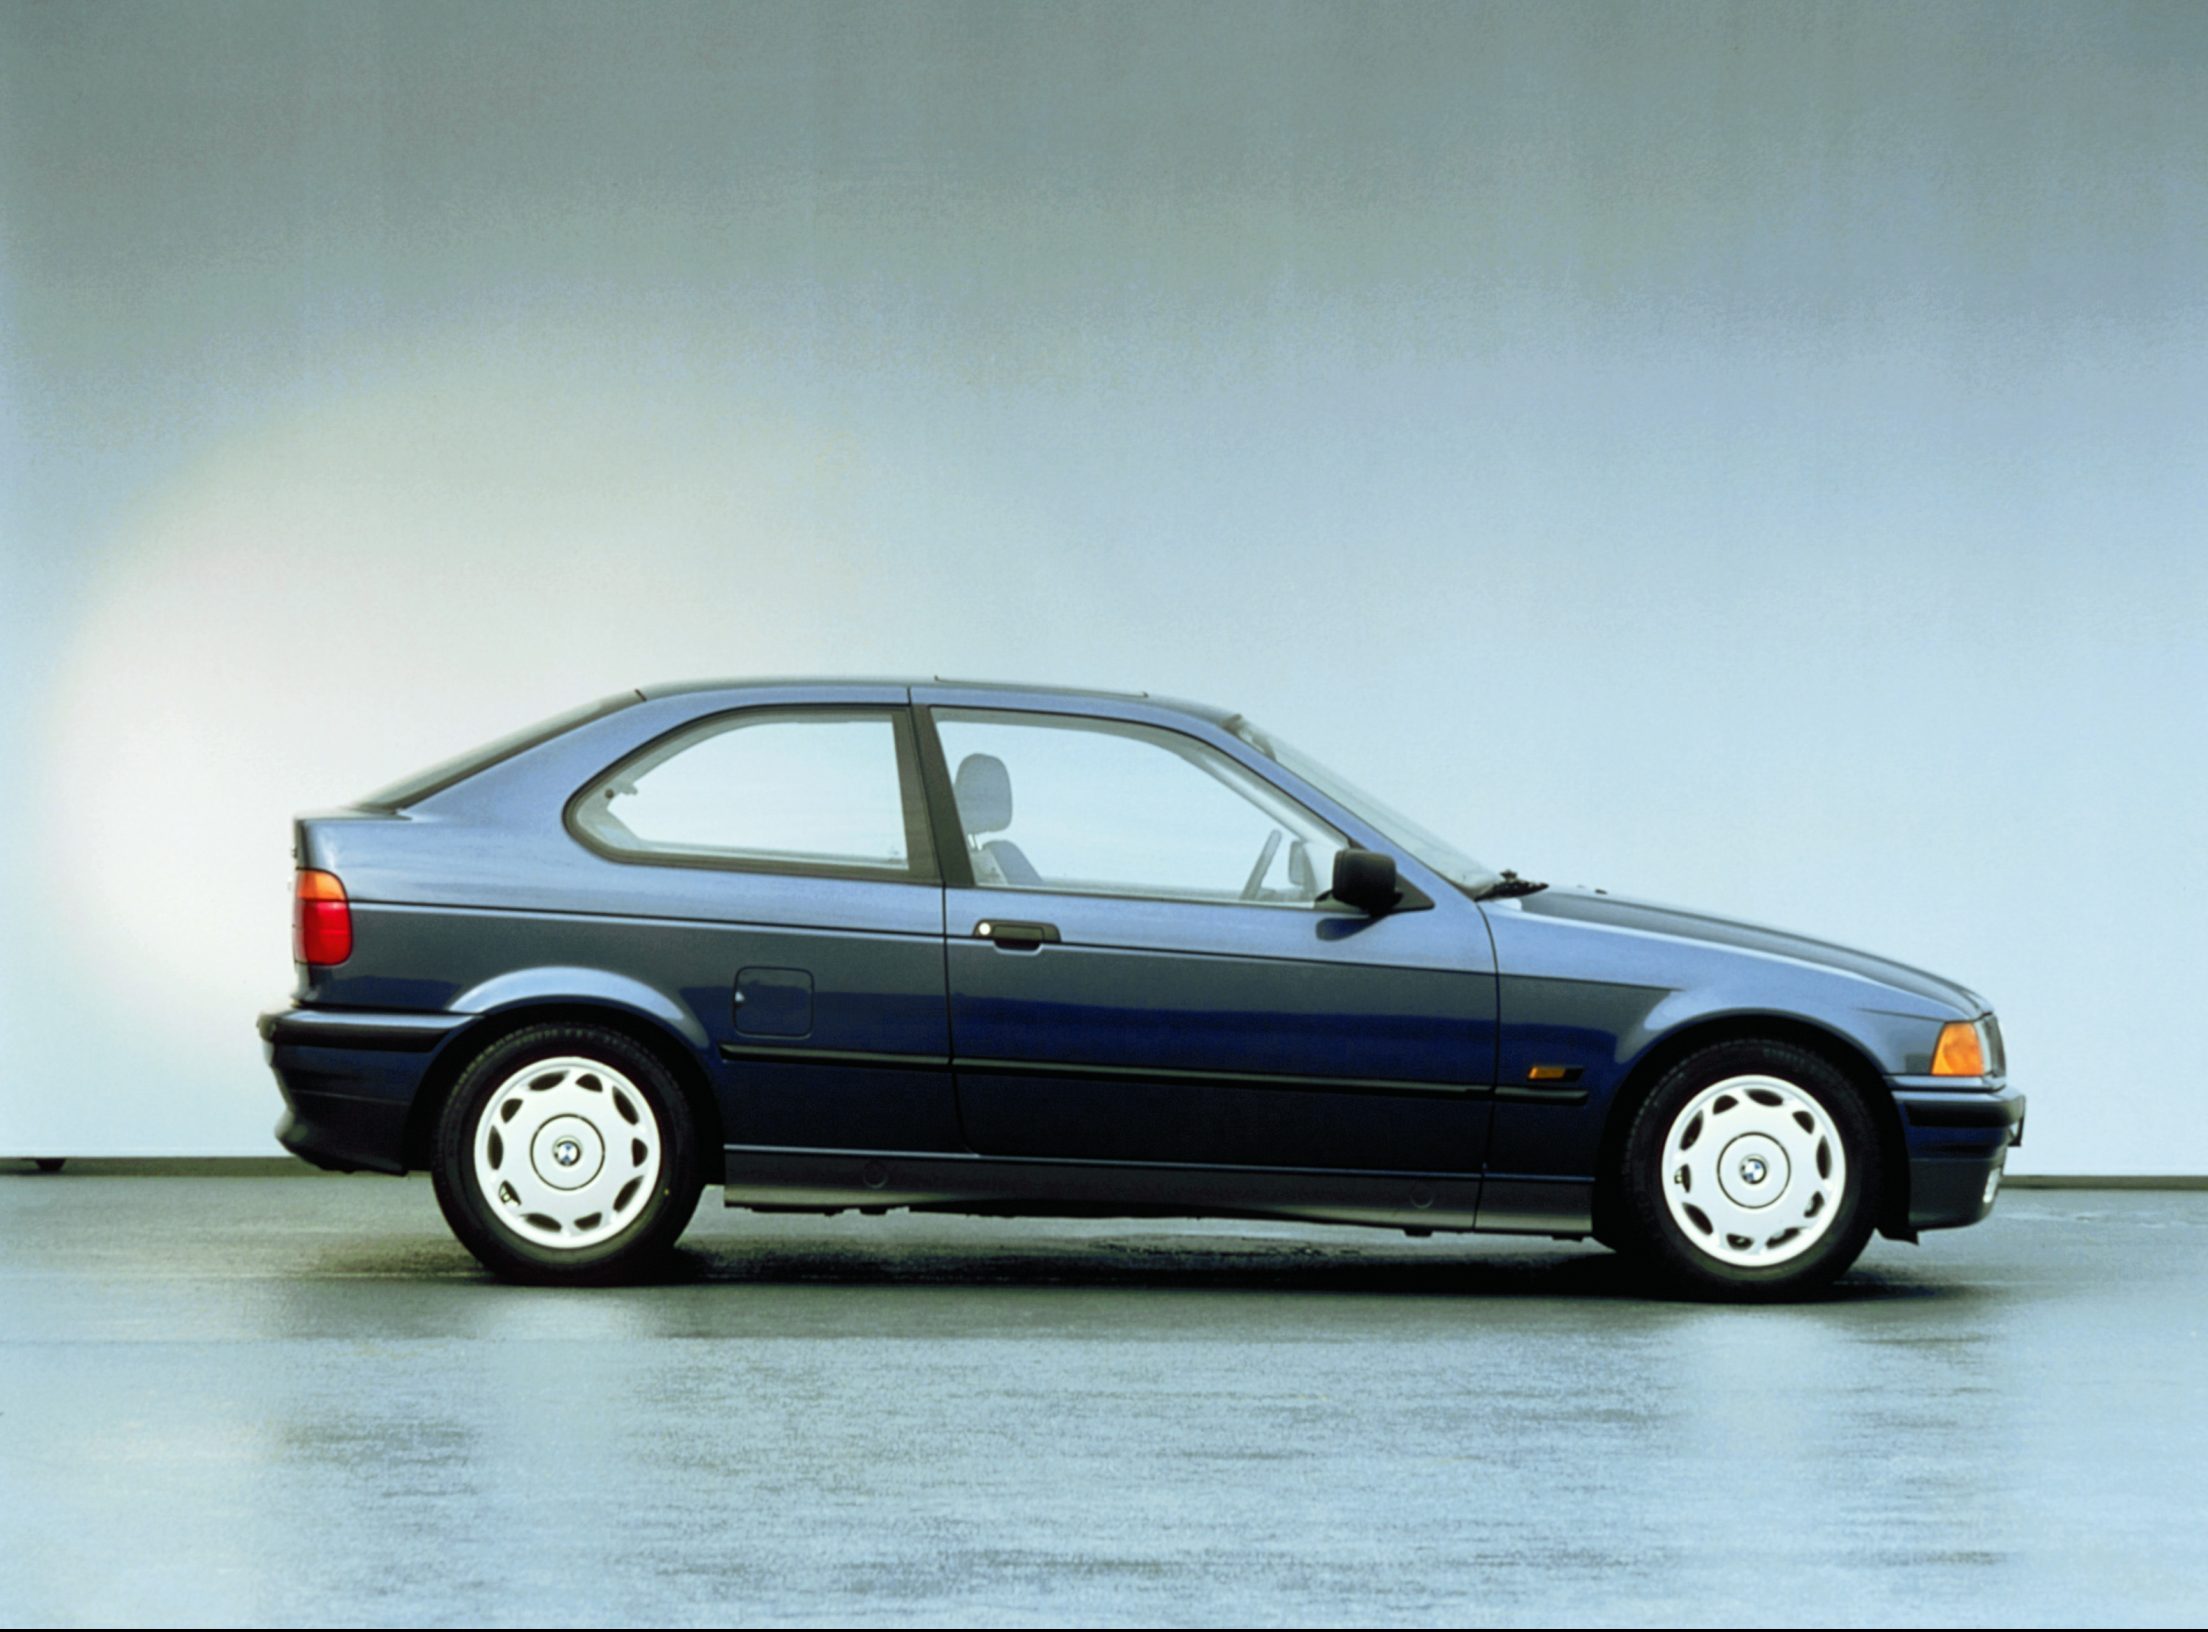 Duffer or desirable? It's time to take another look at the BMW 3